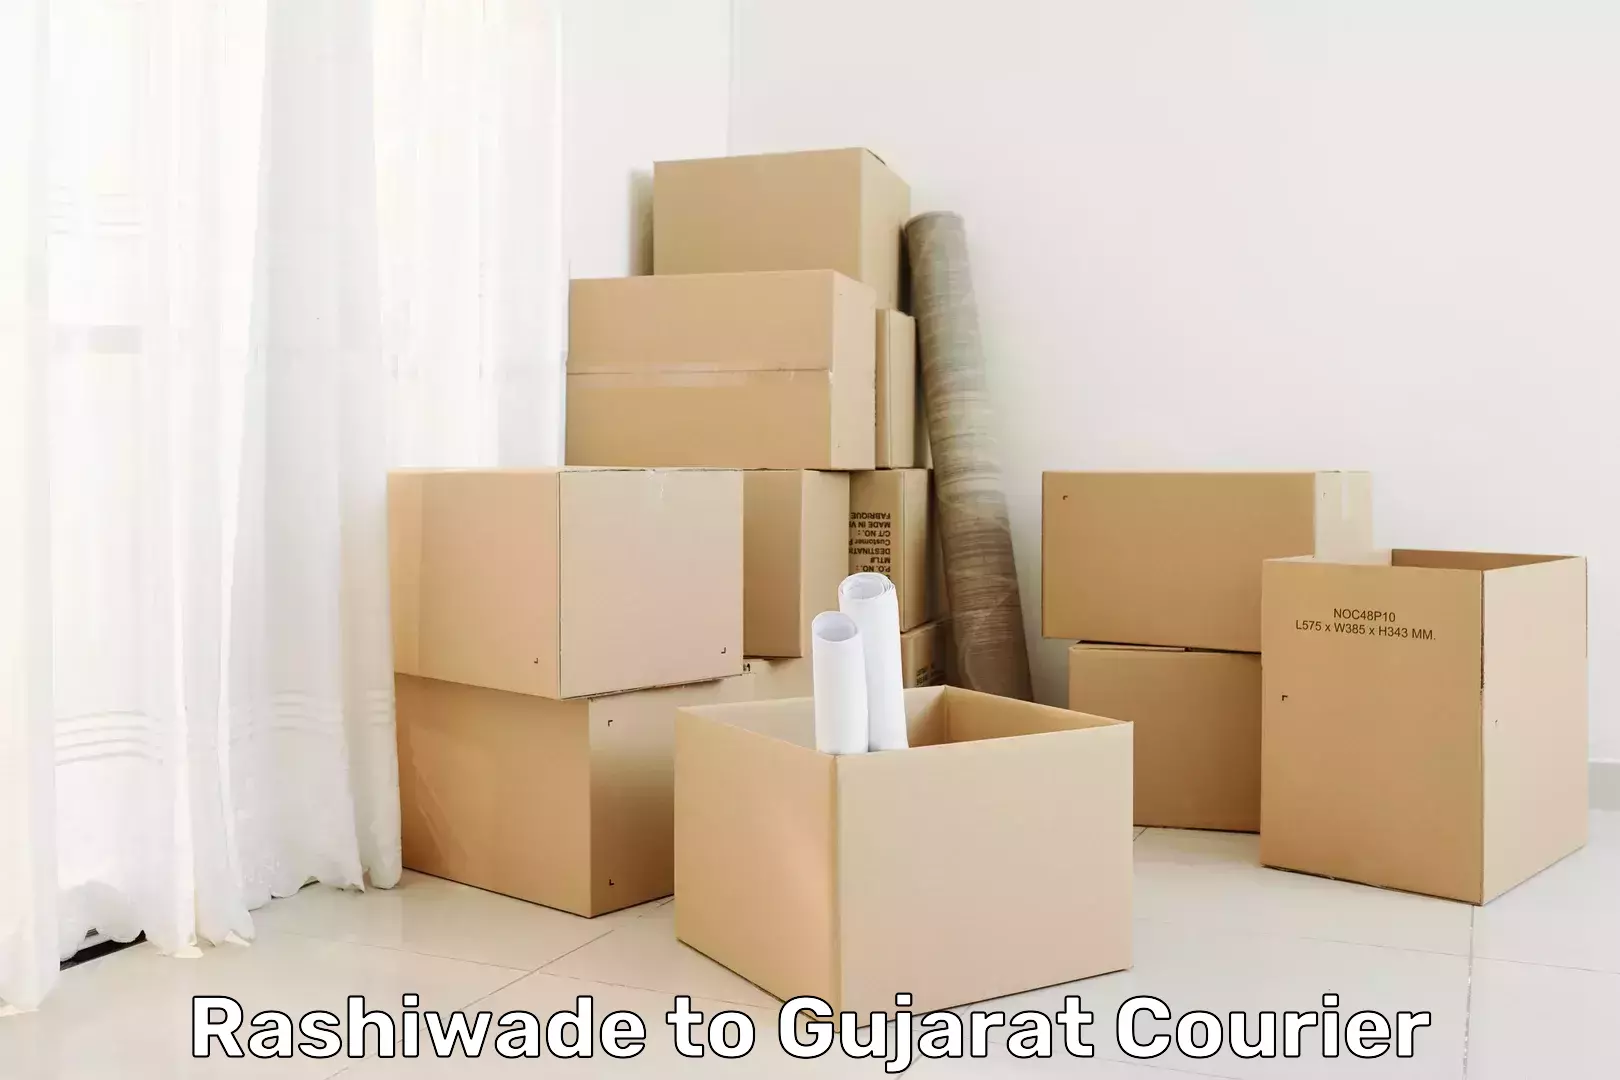 End-to-end delivery in Rashiwade to Gujarat